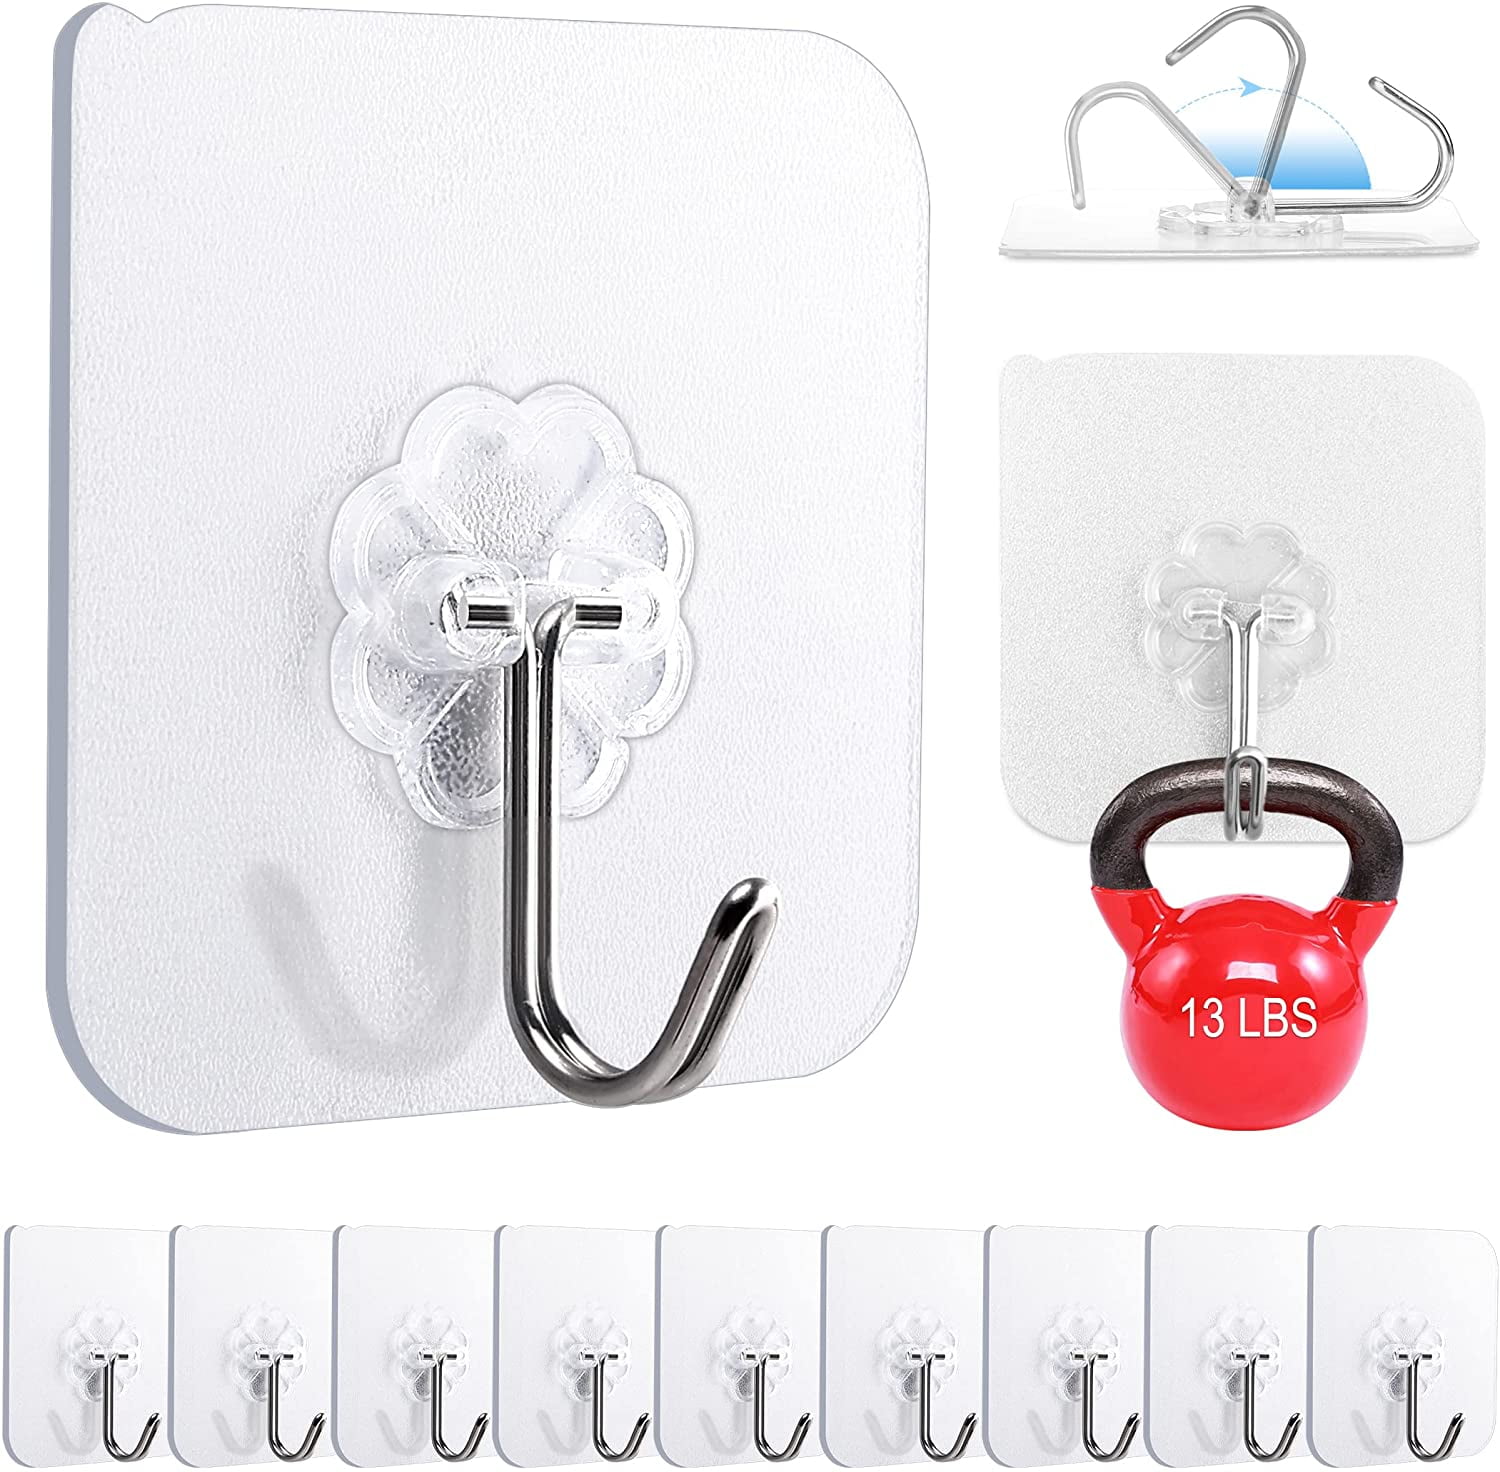 10Pcs Removable Self Adhesive Hooks Wall Door Plastic Hook Strong Holder H8I7 